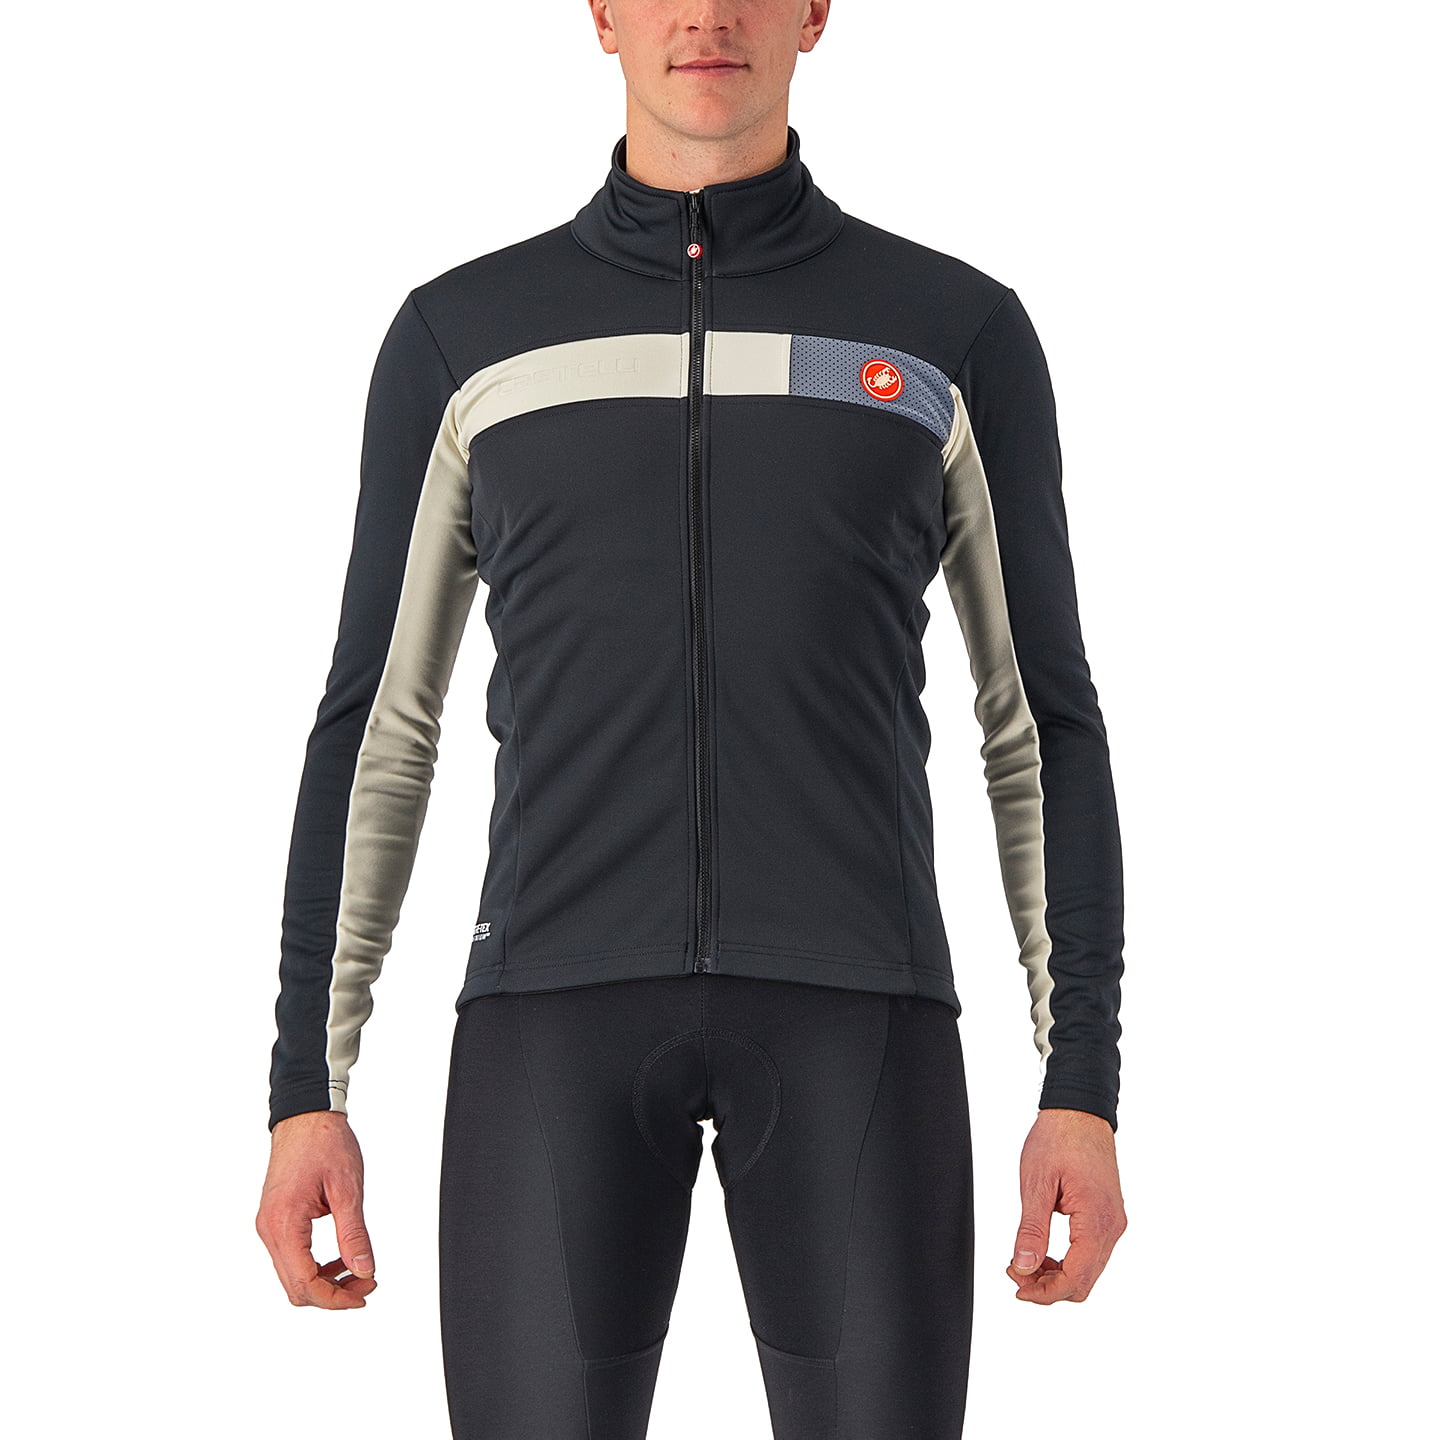 CASTELLI Mortirolo 6S Winter Jacket Thermal Jacket, for men, size 2XL, Winter jacket, Cycling clothing